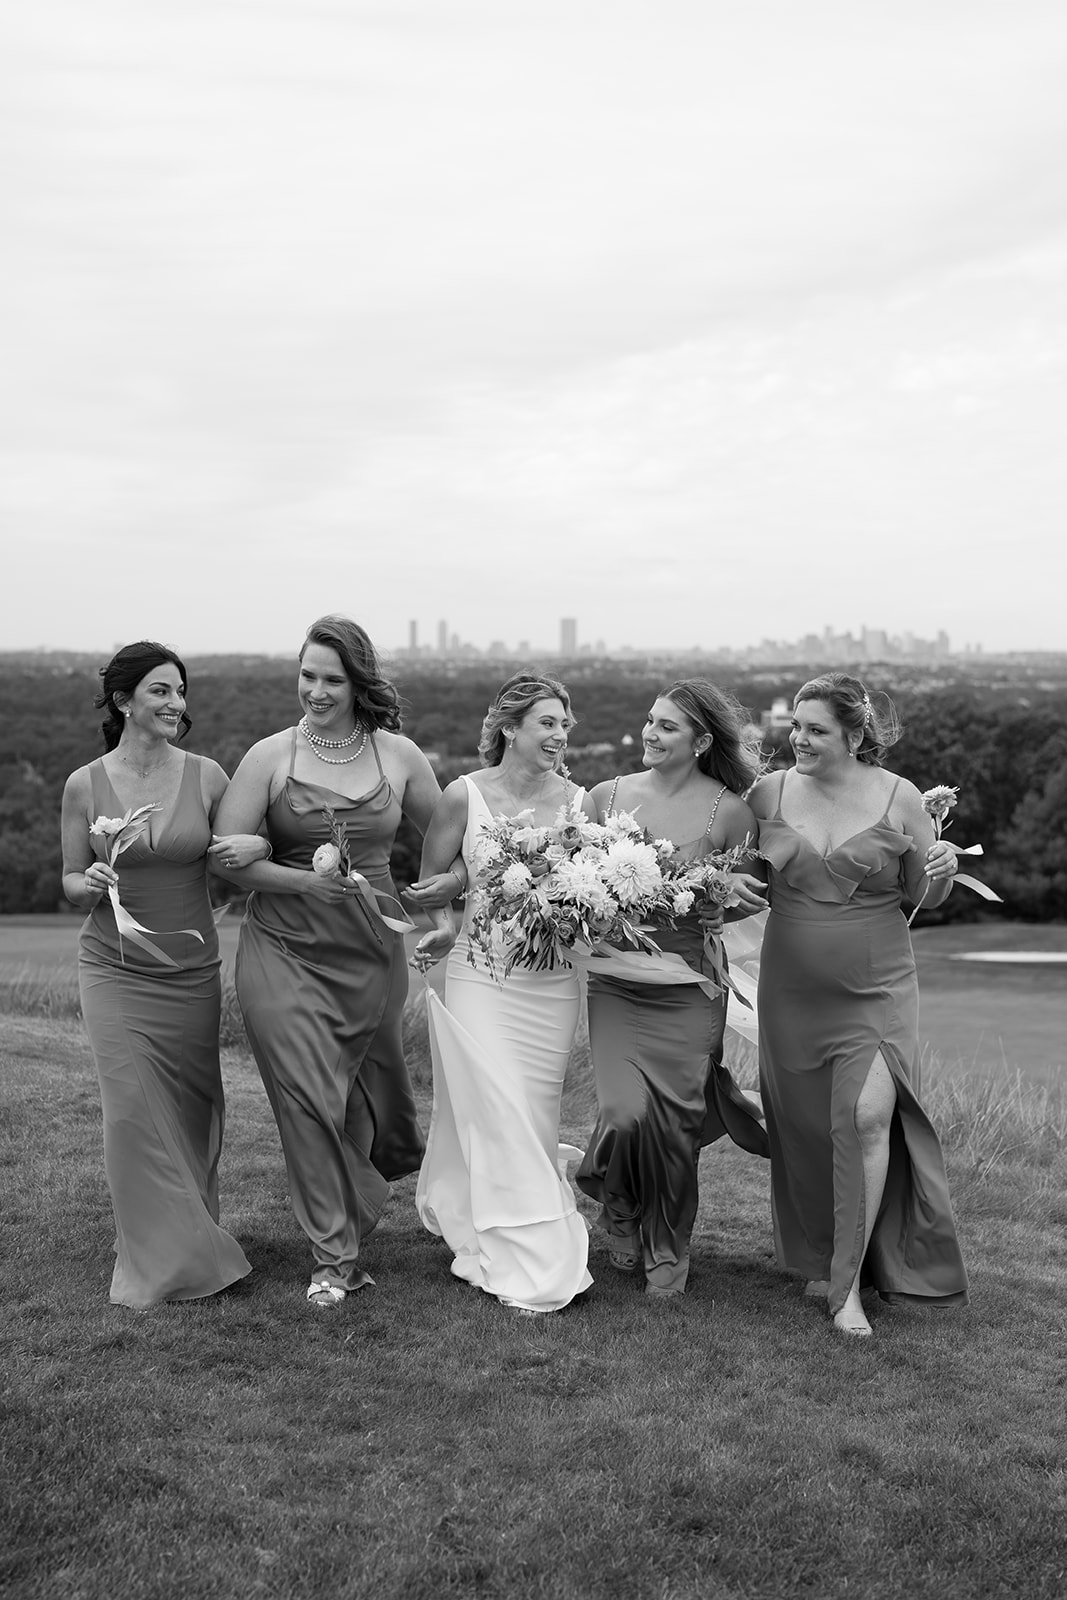 Wedding party celebrating against Boston skyline. Bridesmaids and groomsmen buzzing with excitement and joy.